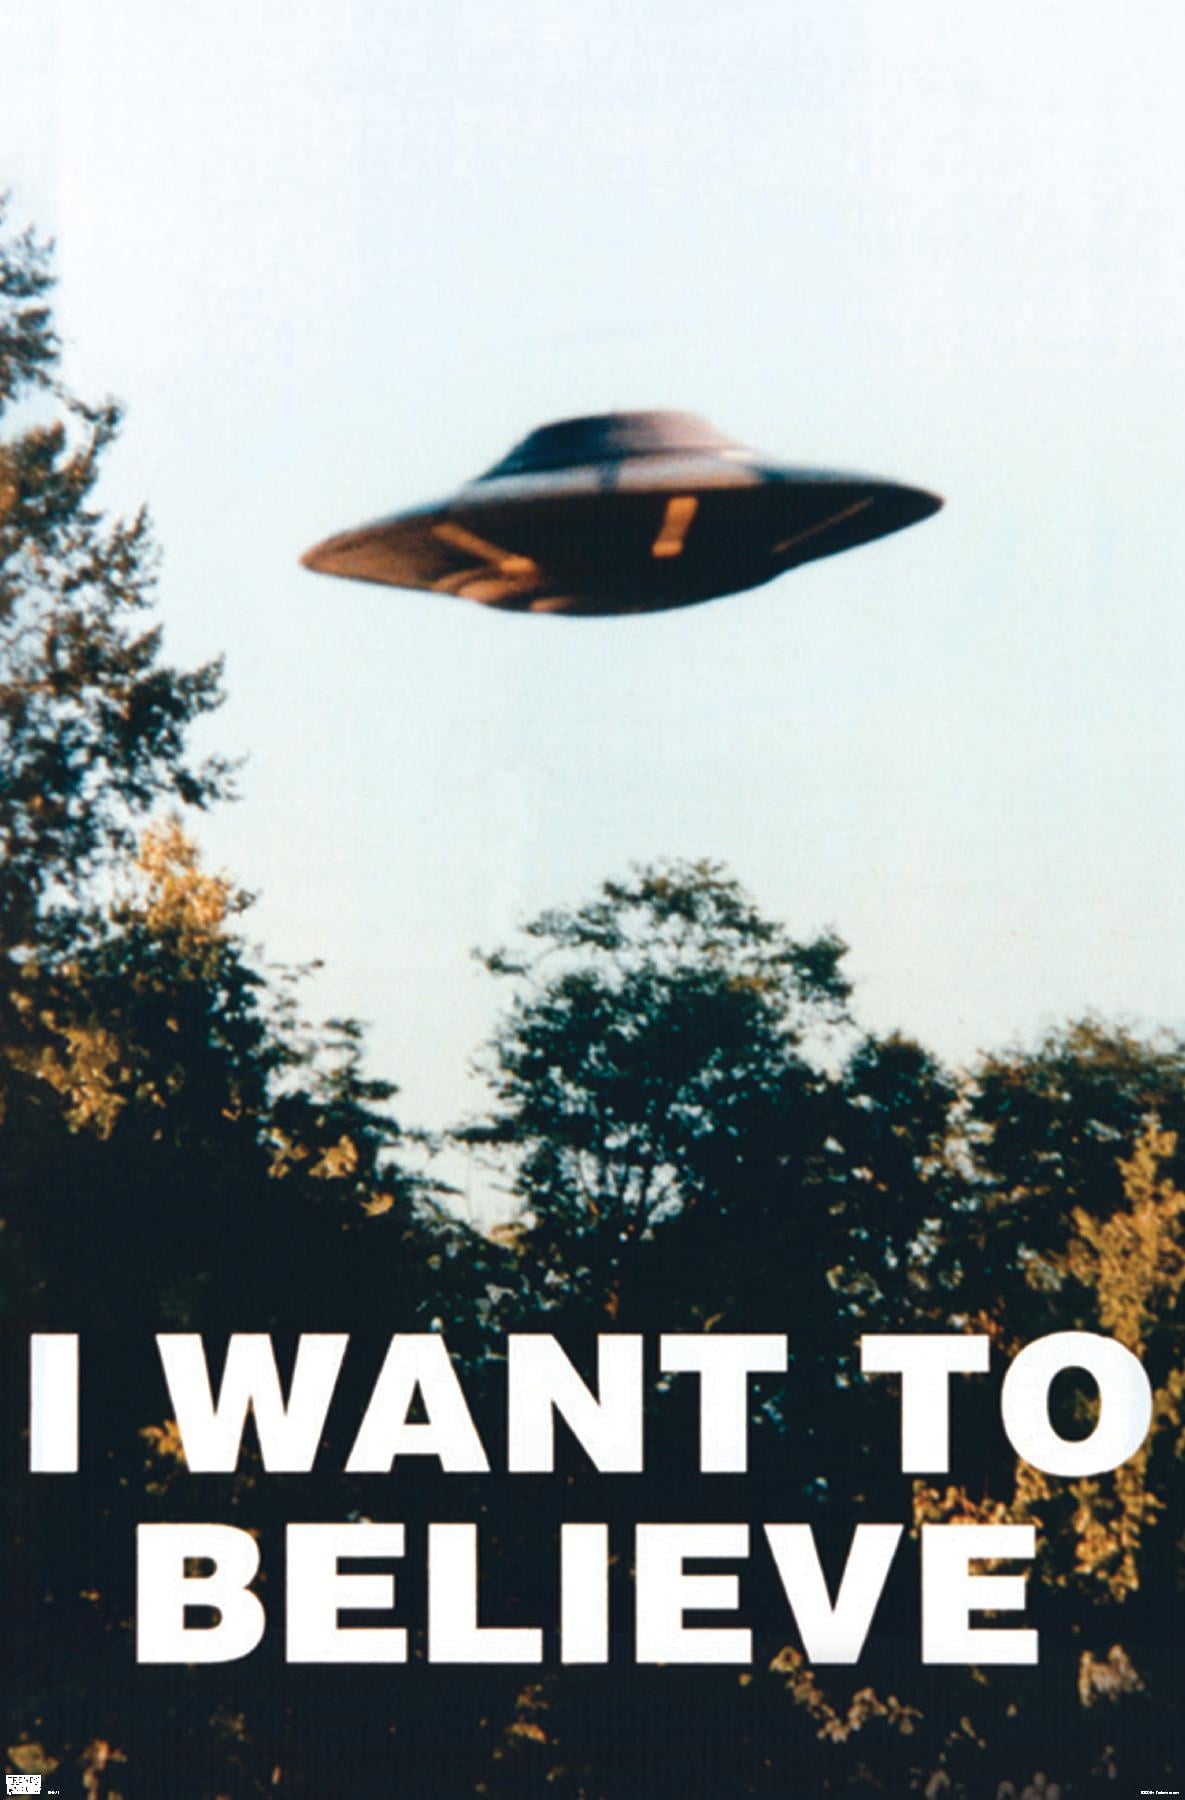 The X-Files - I Want To Believe Wall Poster, 22.375